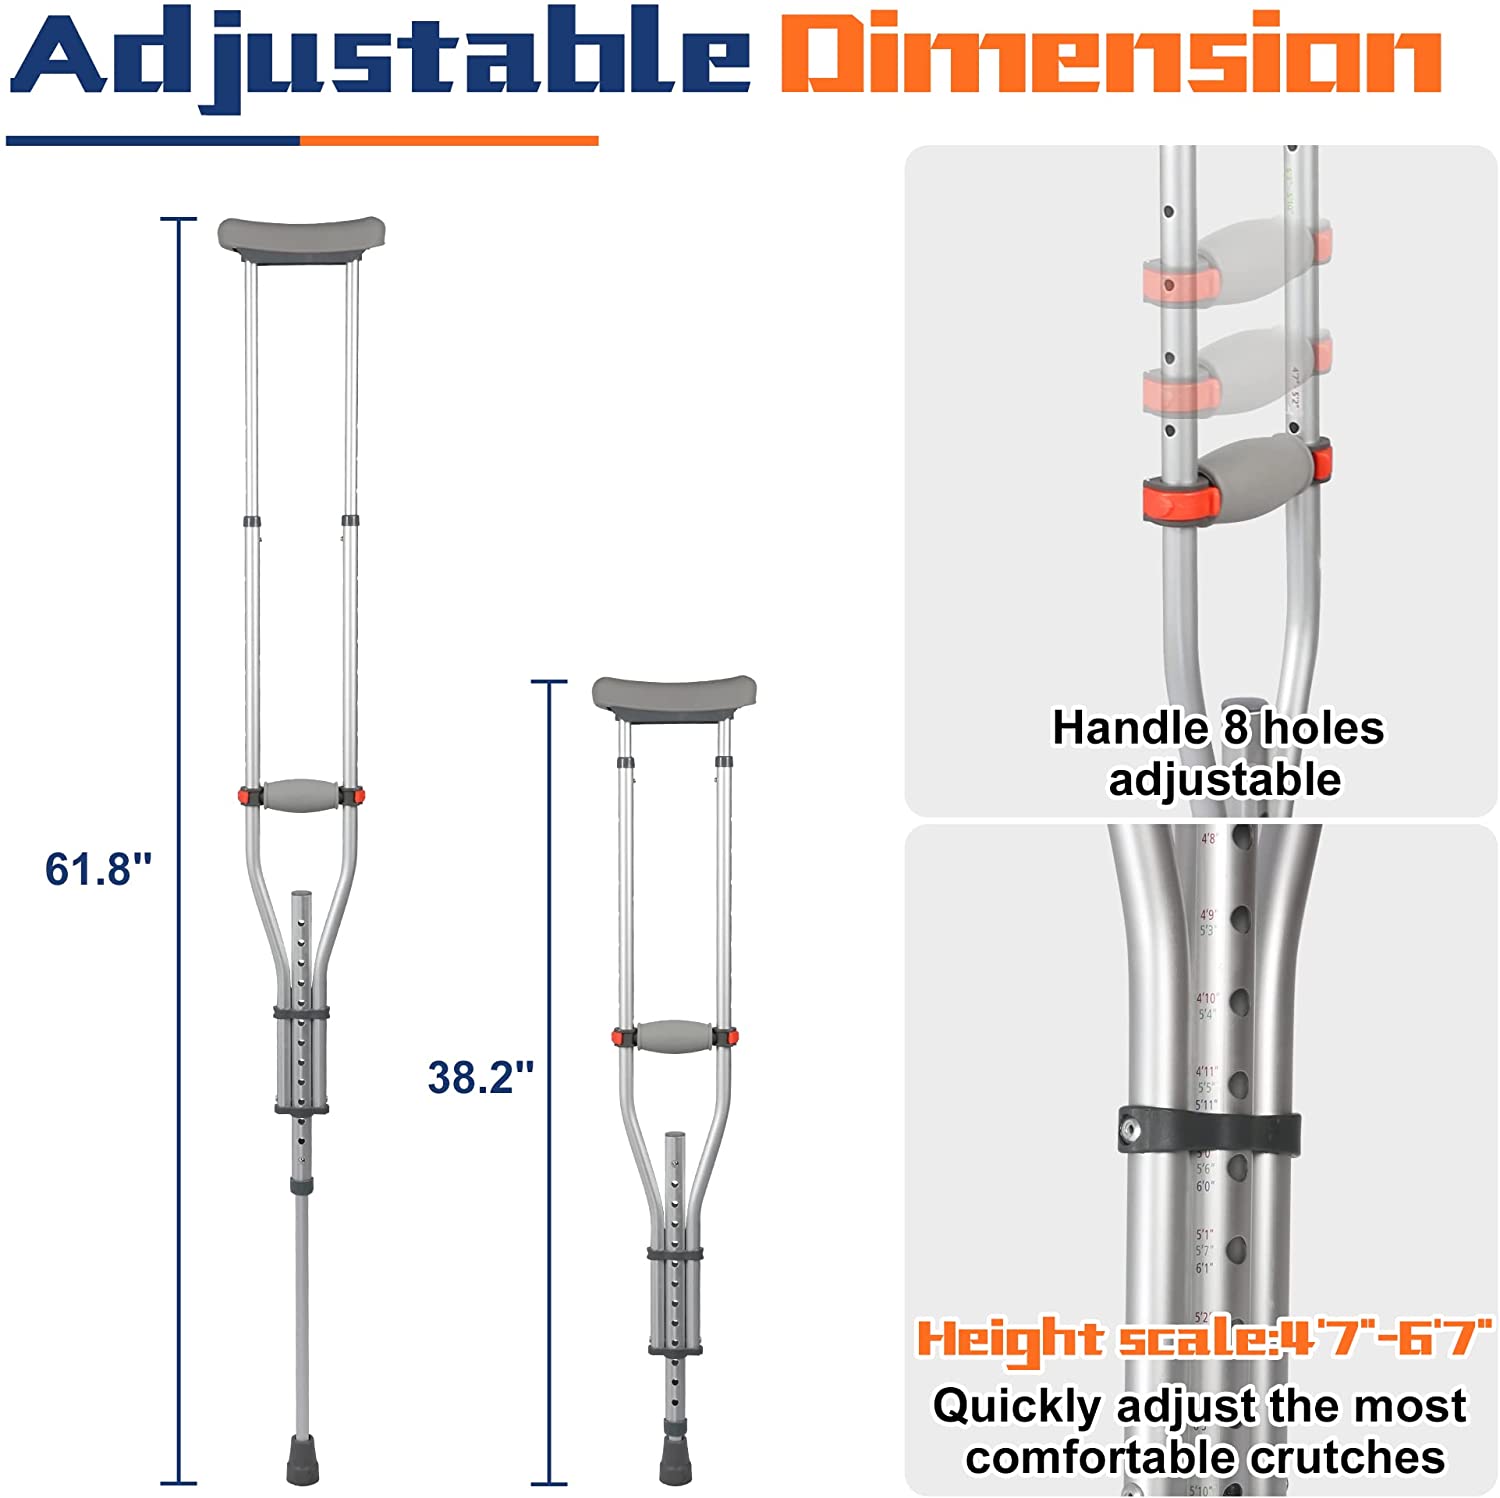 1 Pair Forearm Crutches, Universal Aluminum Non-Slip Crutches w/ Adjustable Height & Turning Arm Cuffs